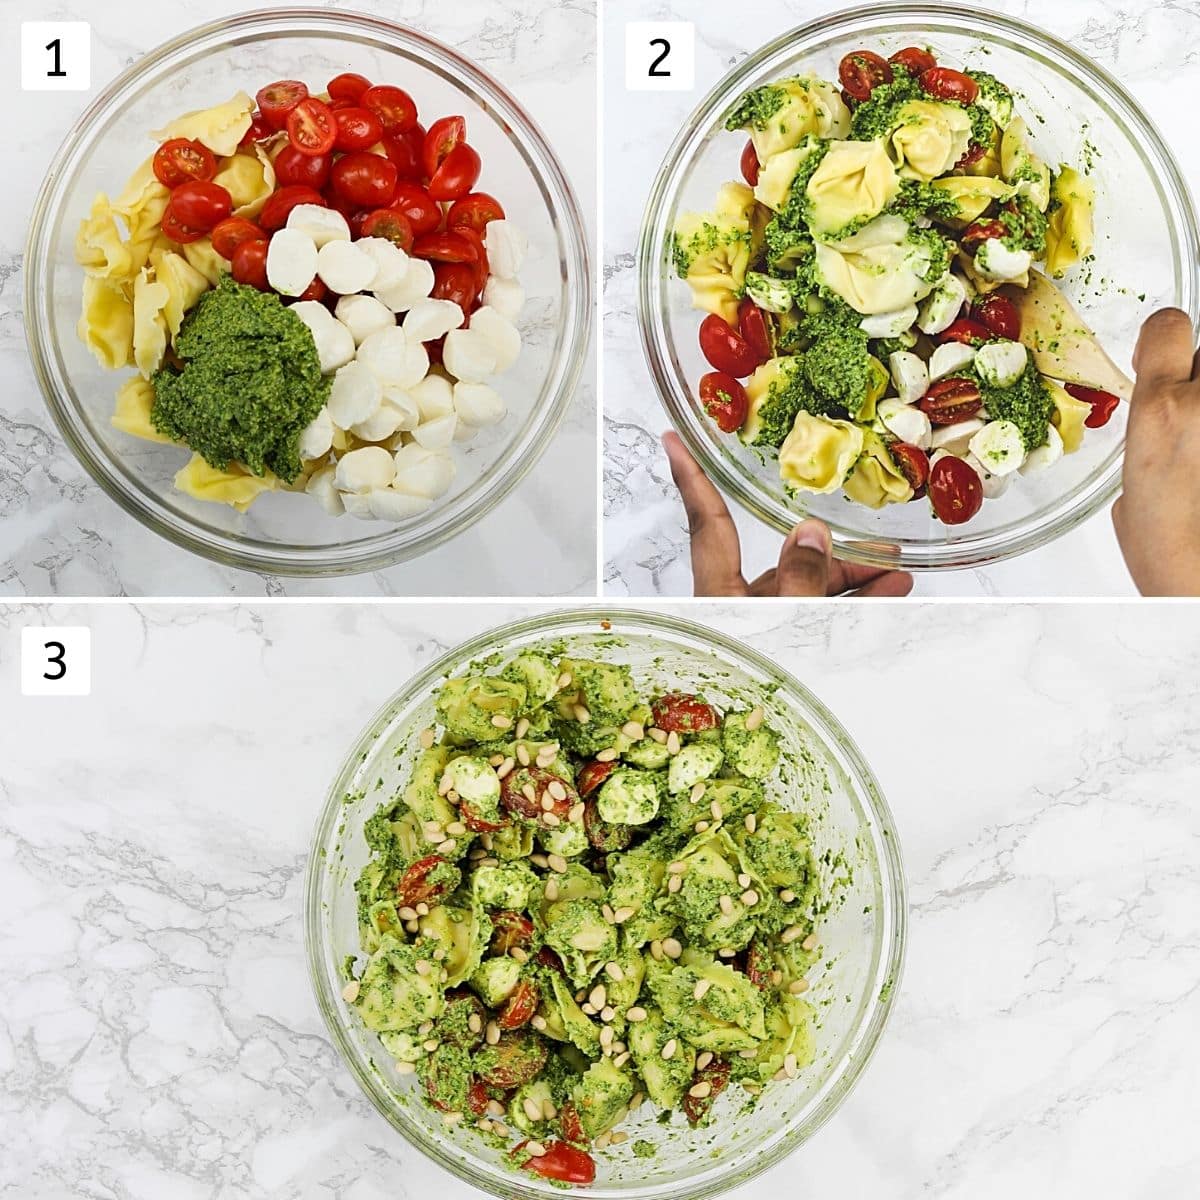 Collage of 3 steps showing salad ingredients in a bowl and tossing together.